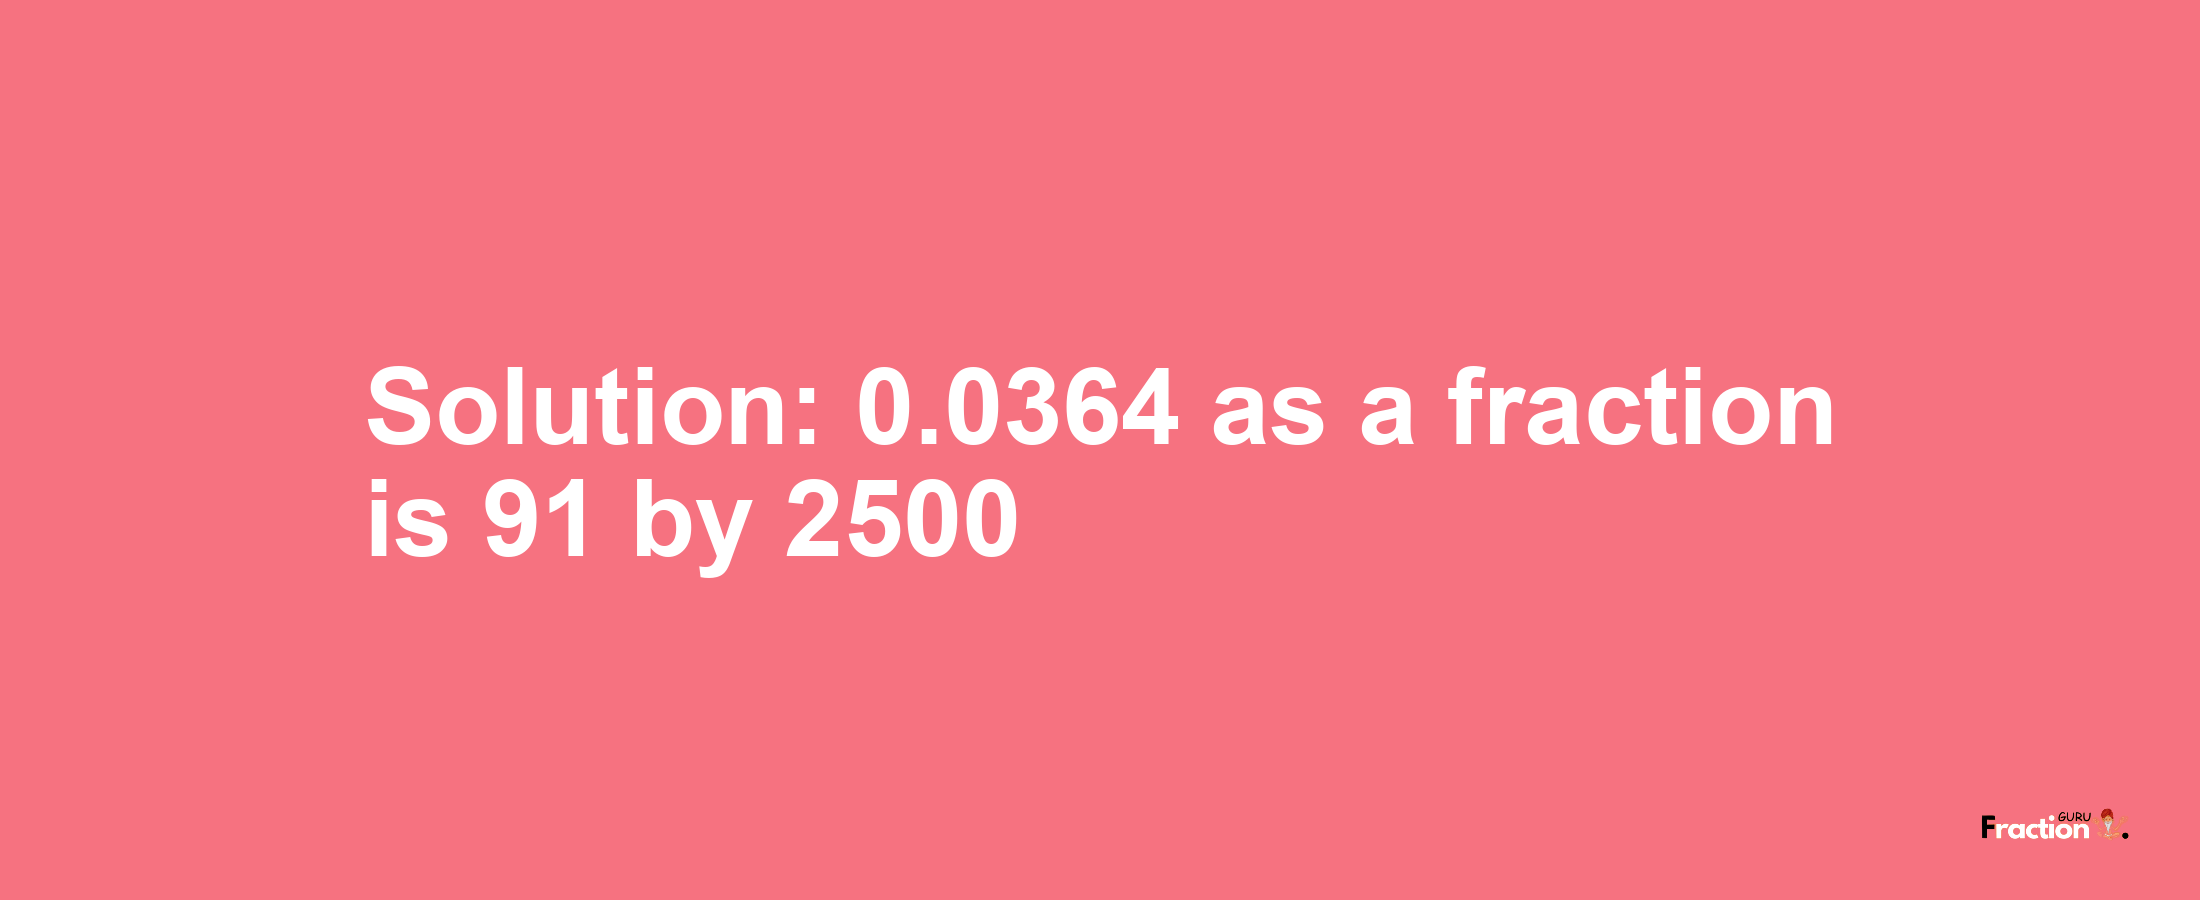 Solution:0.0364 as a fraction is 91/2500